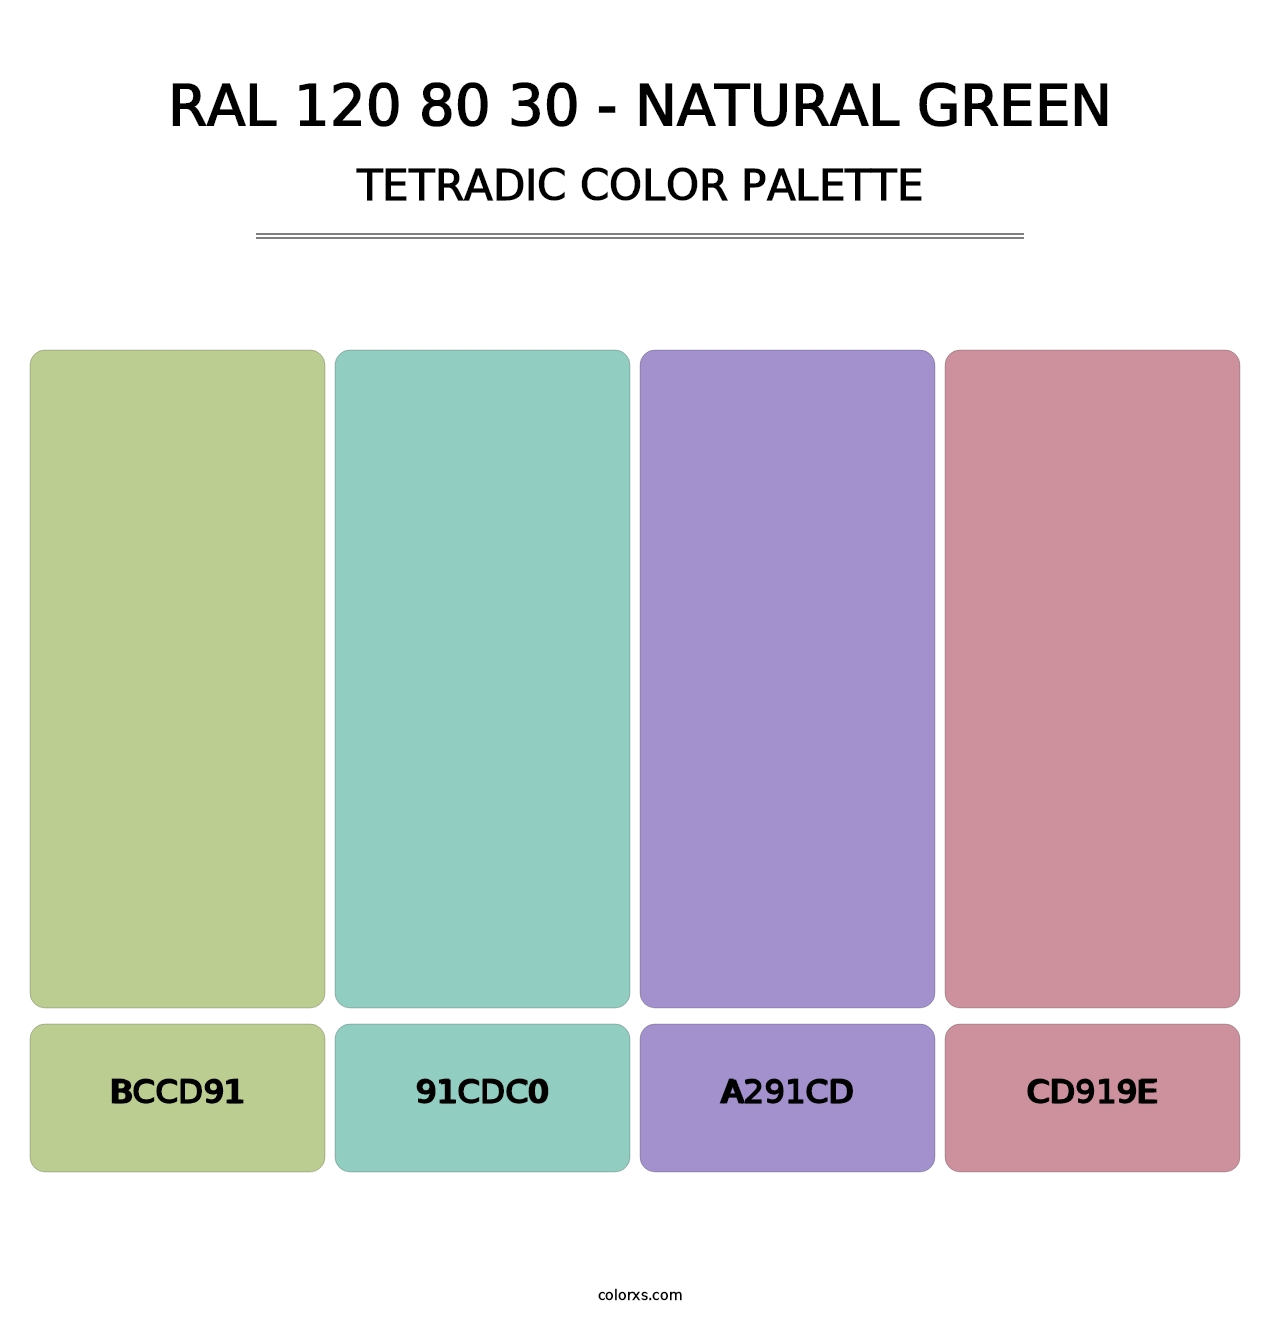 RAL 120 80 30 - Natural Green - Tetradic Color Palette